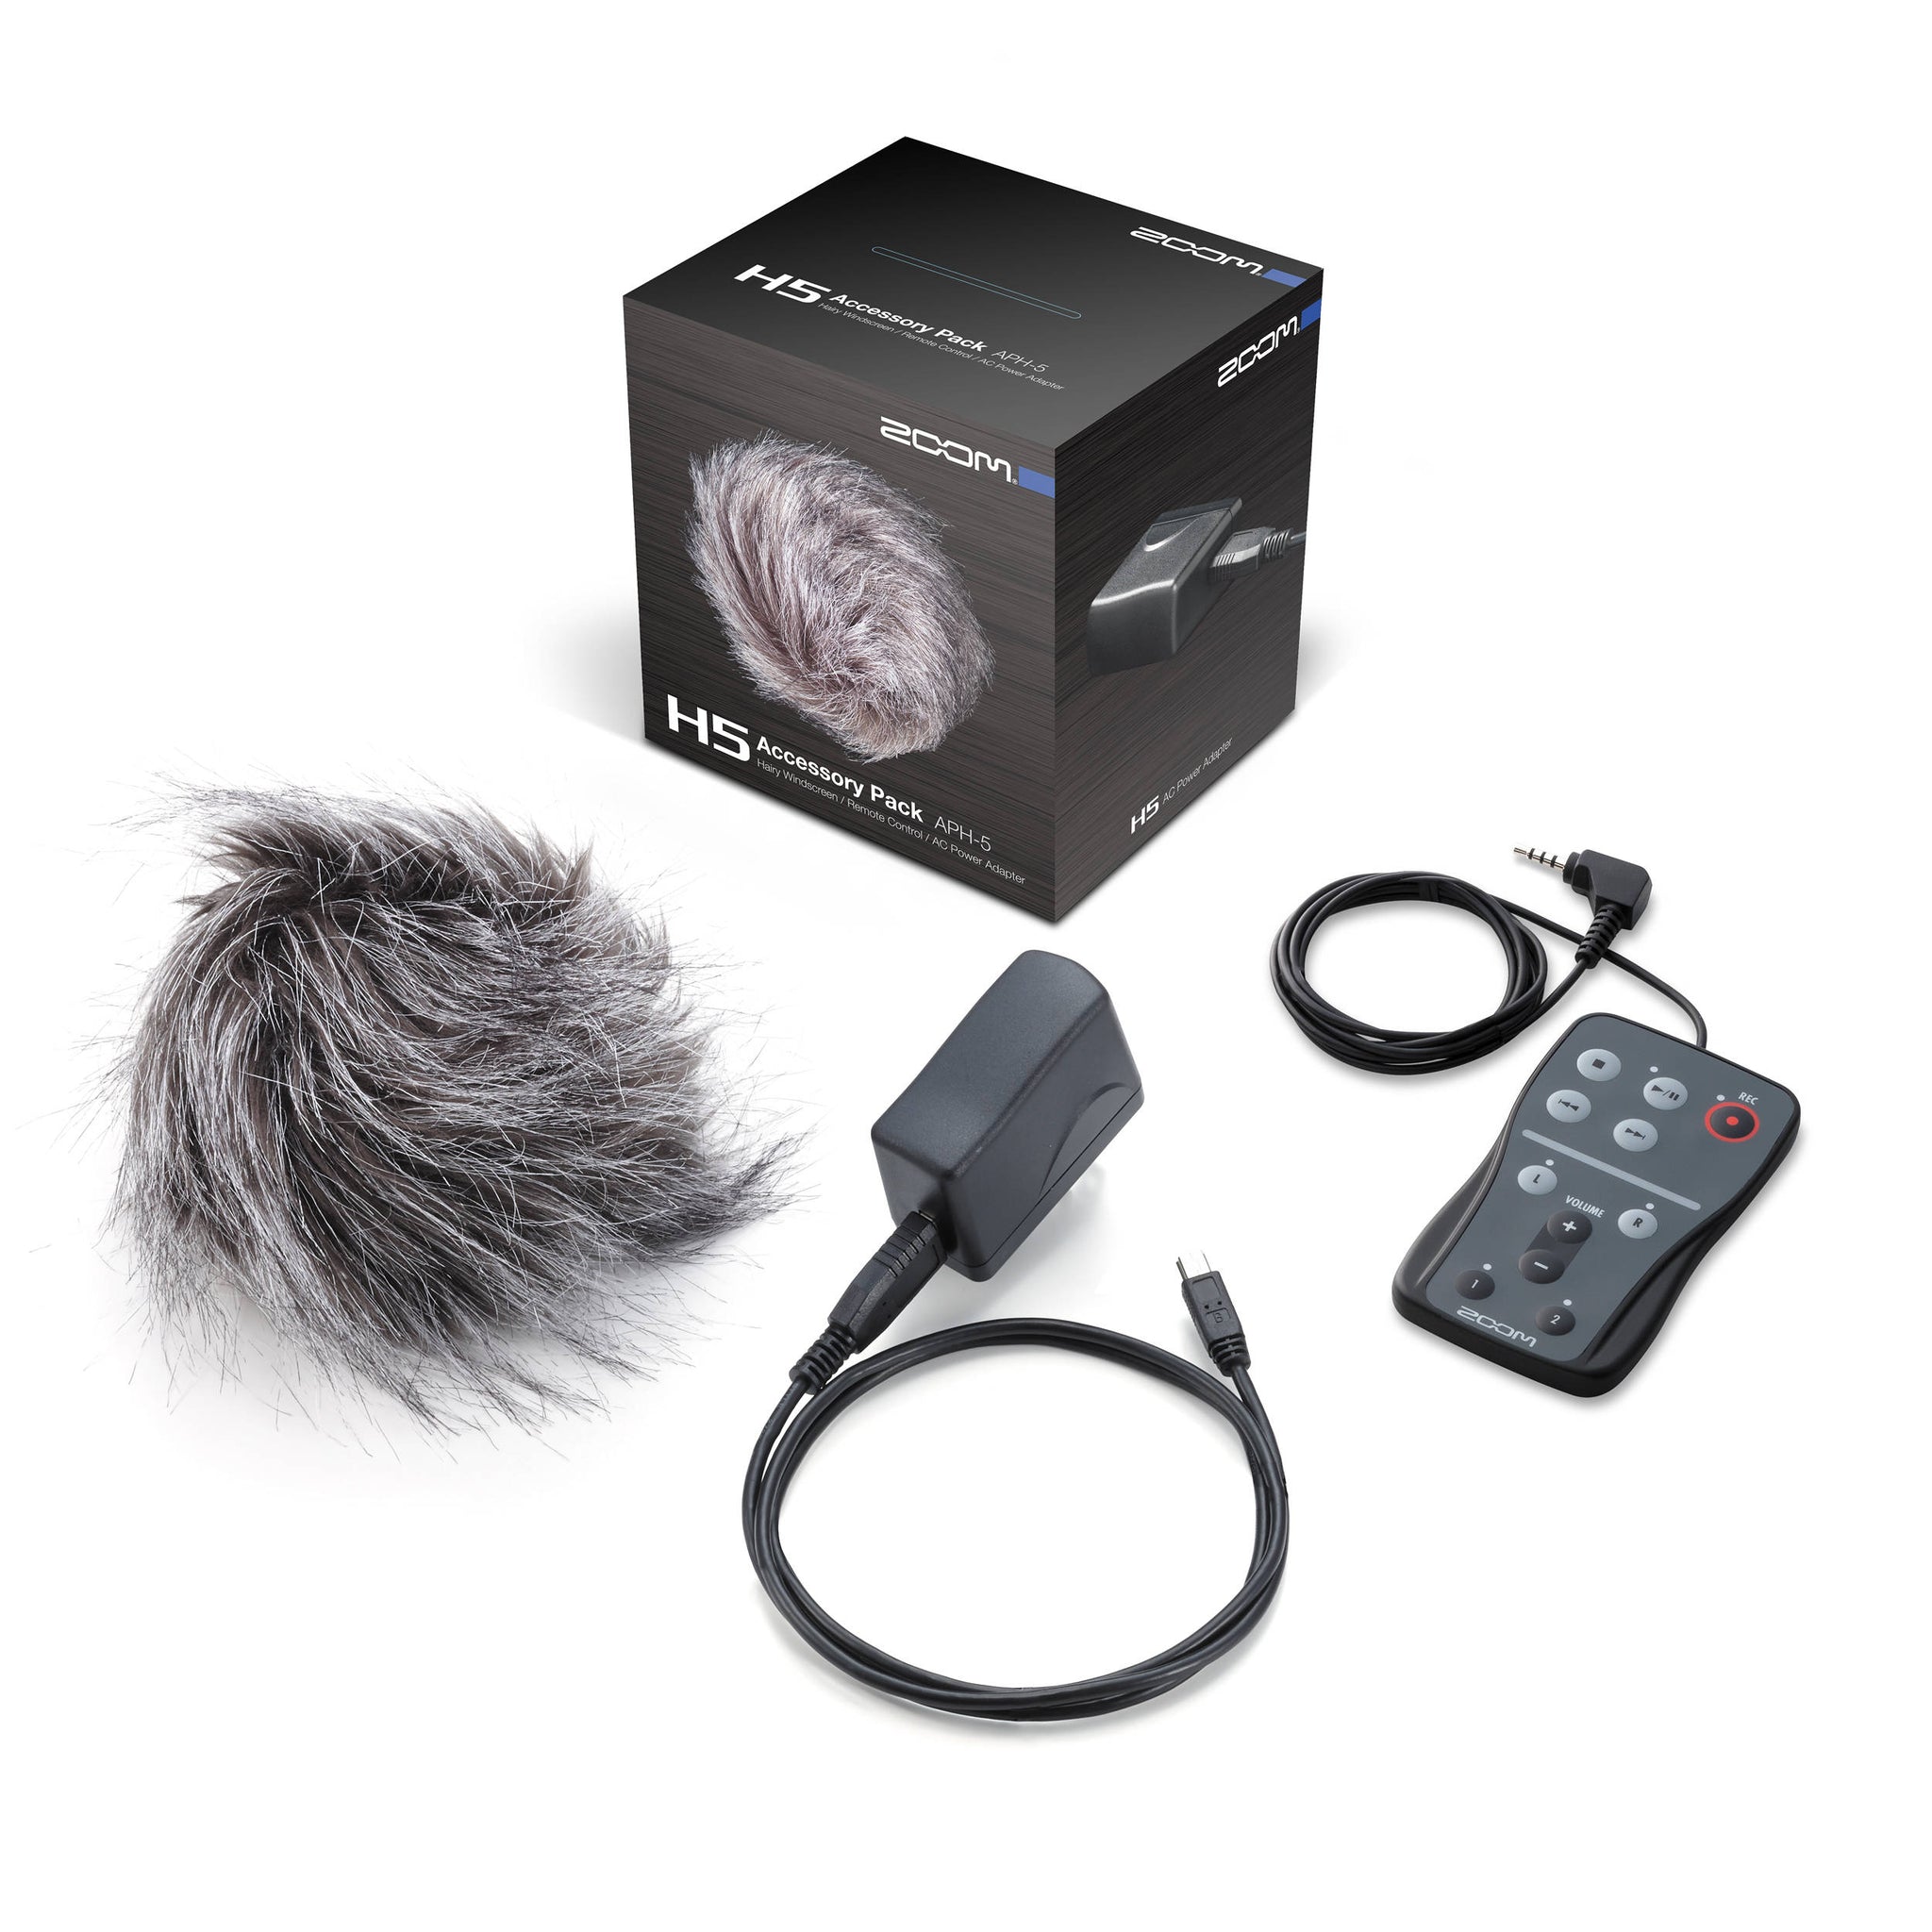 Zoom APH-5 (Accessory Pack for Zoom H5)